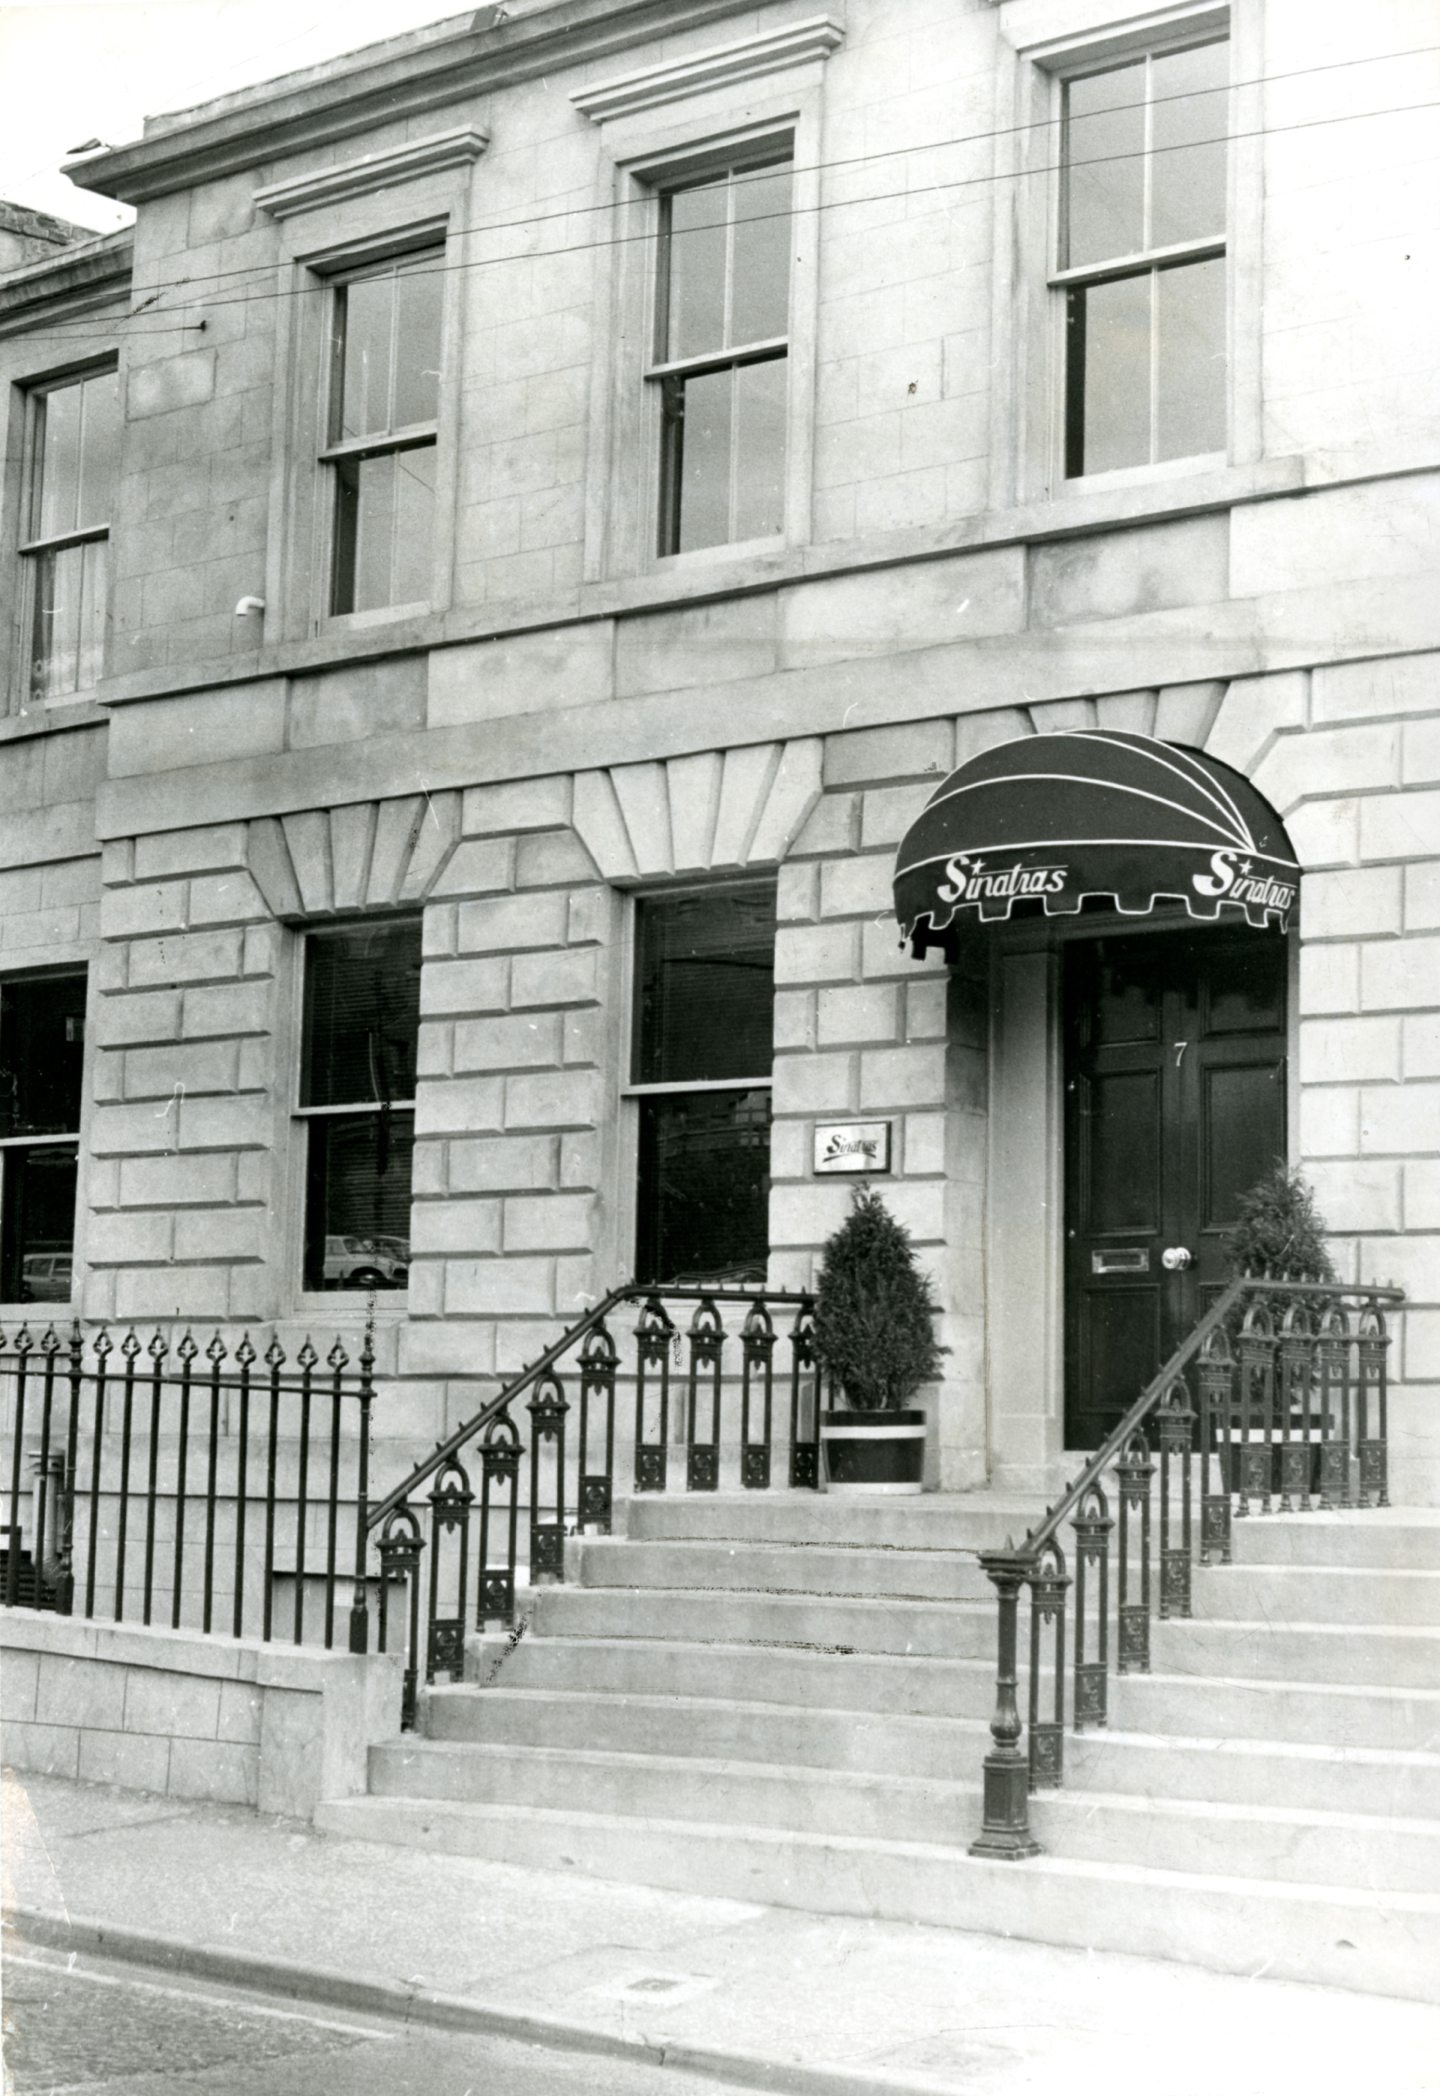 Sinatra's famous exterior which was visited by thousands of revellers over three decades